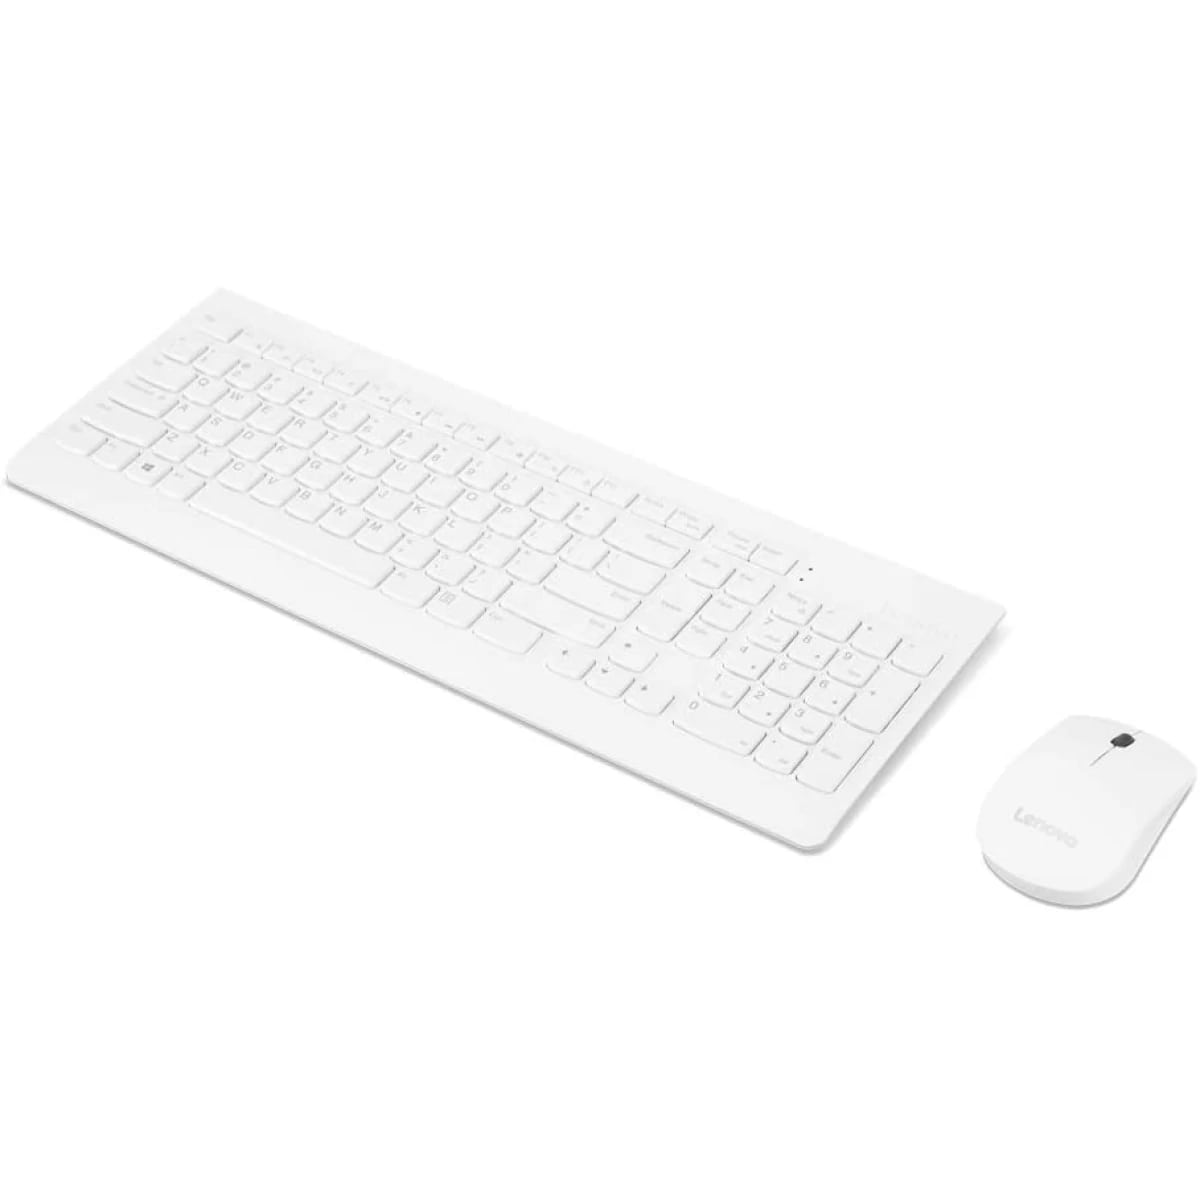 Lenovo Wireless Keyboard and Mouse Combo 510 - White